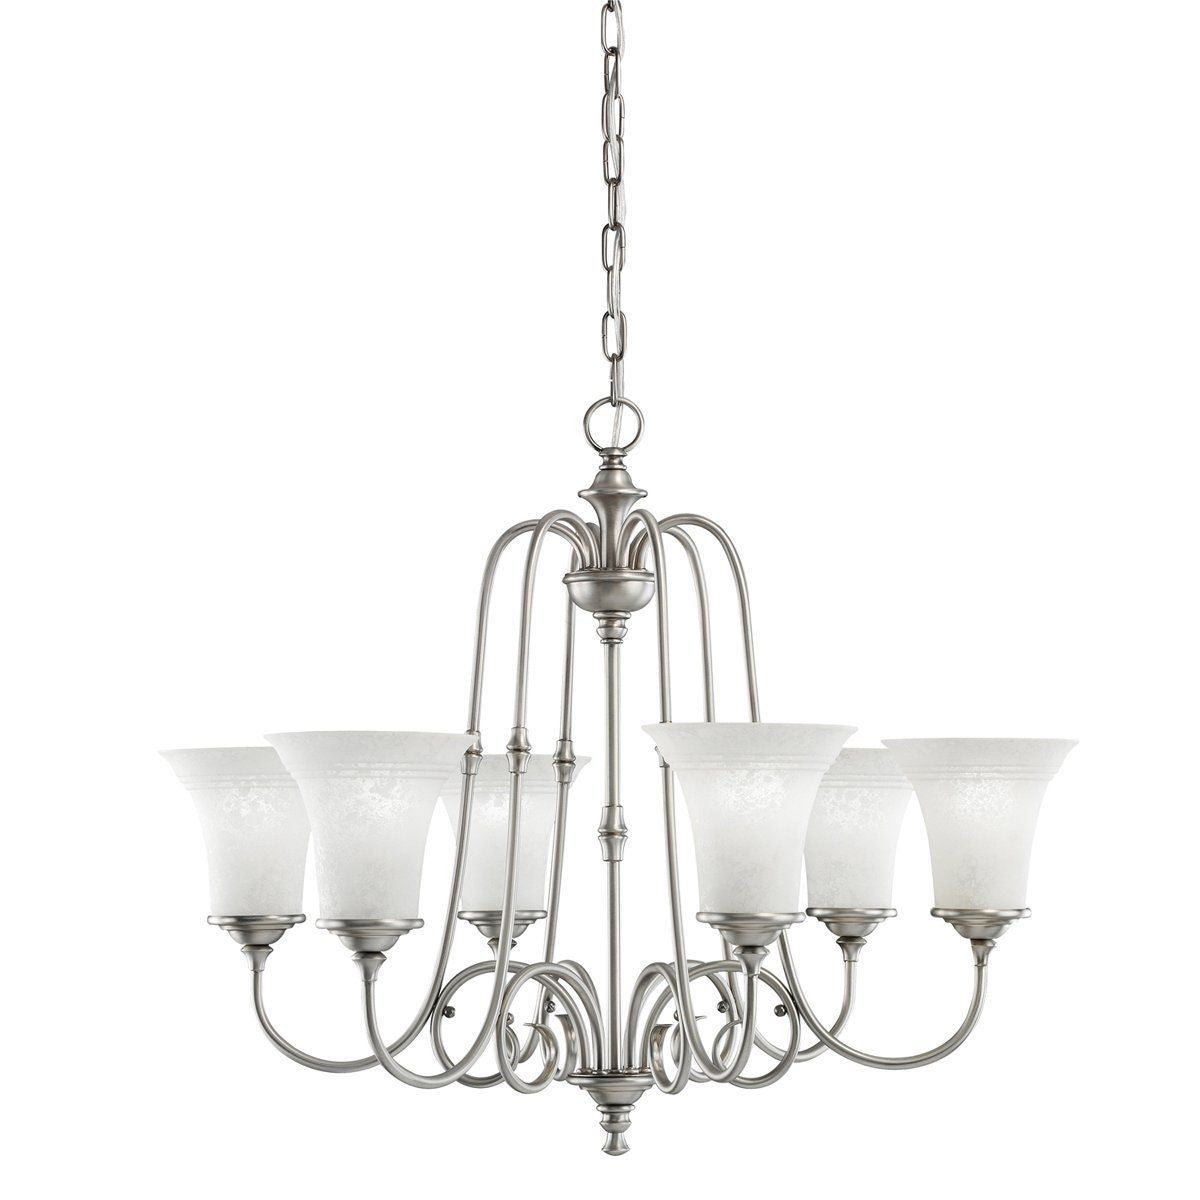 Aztec by Kichler Lighting 34929 Six Light Northampton Collection Hanging Chandelier in Antique Pewter Finish